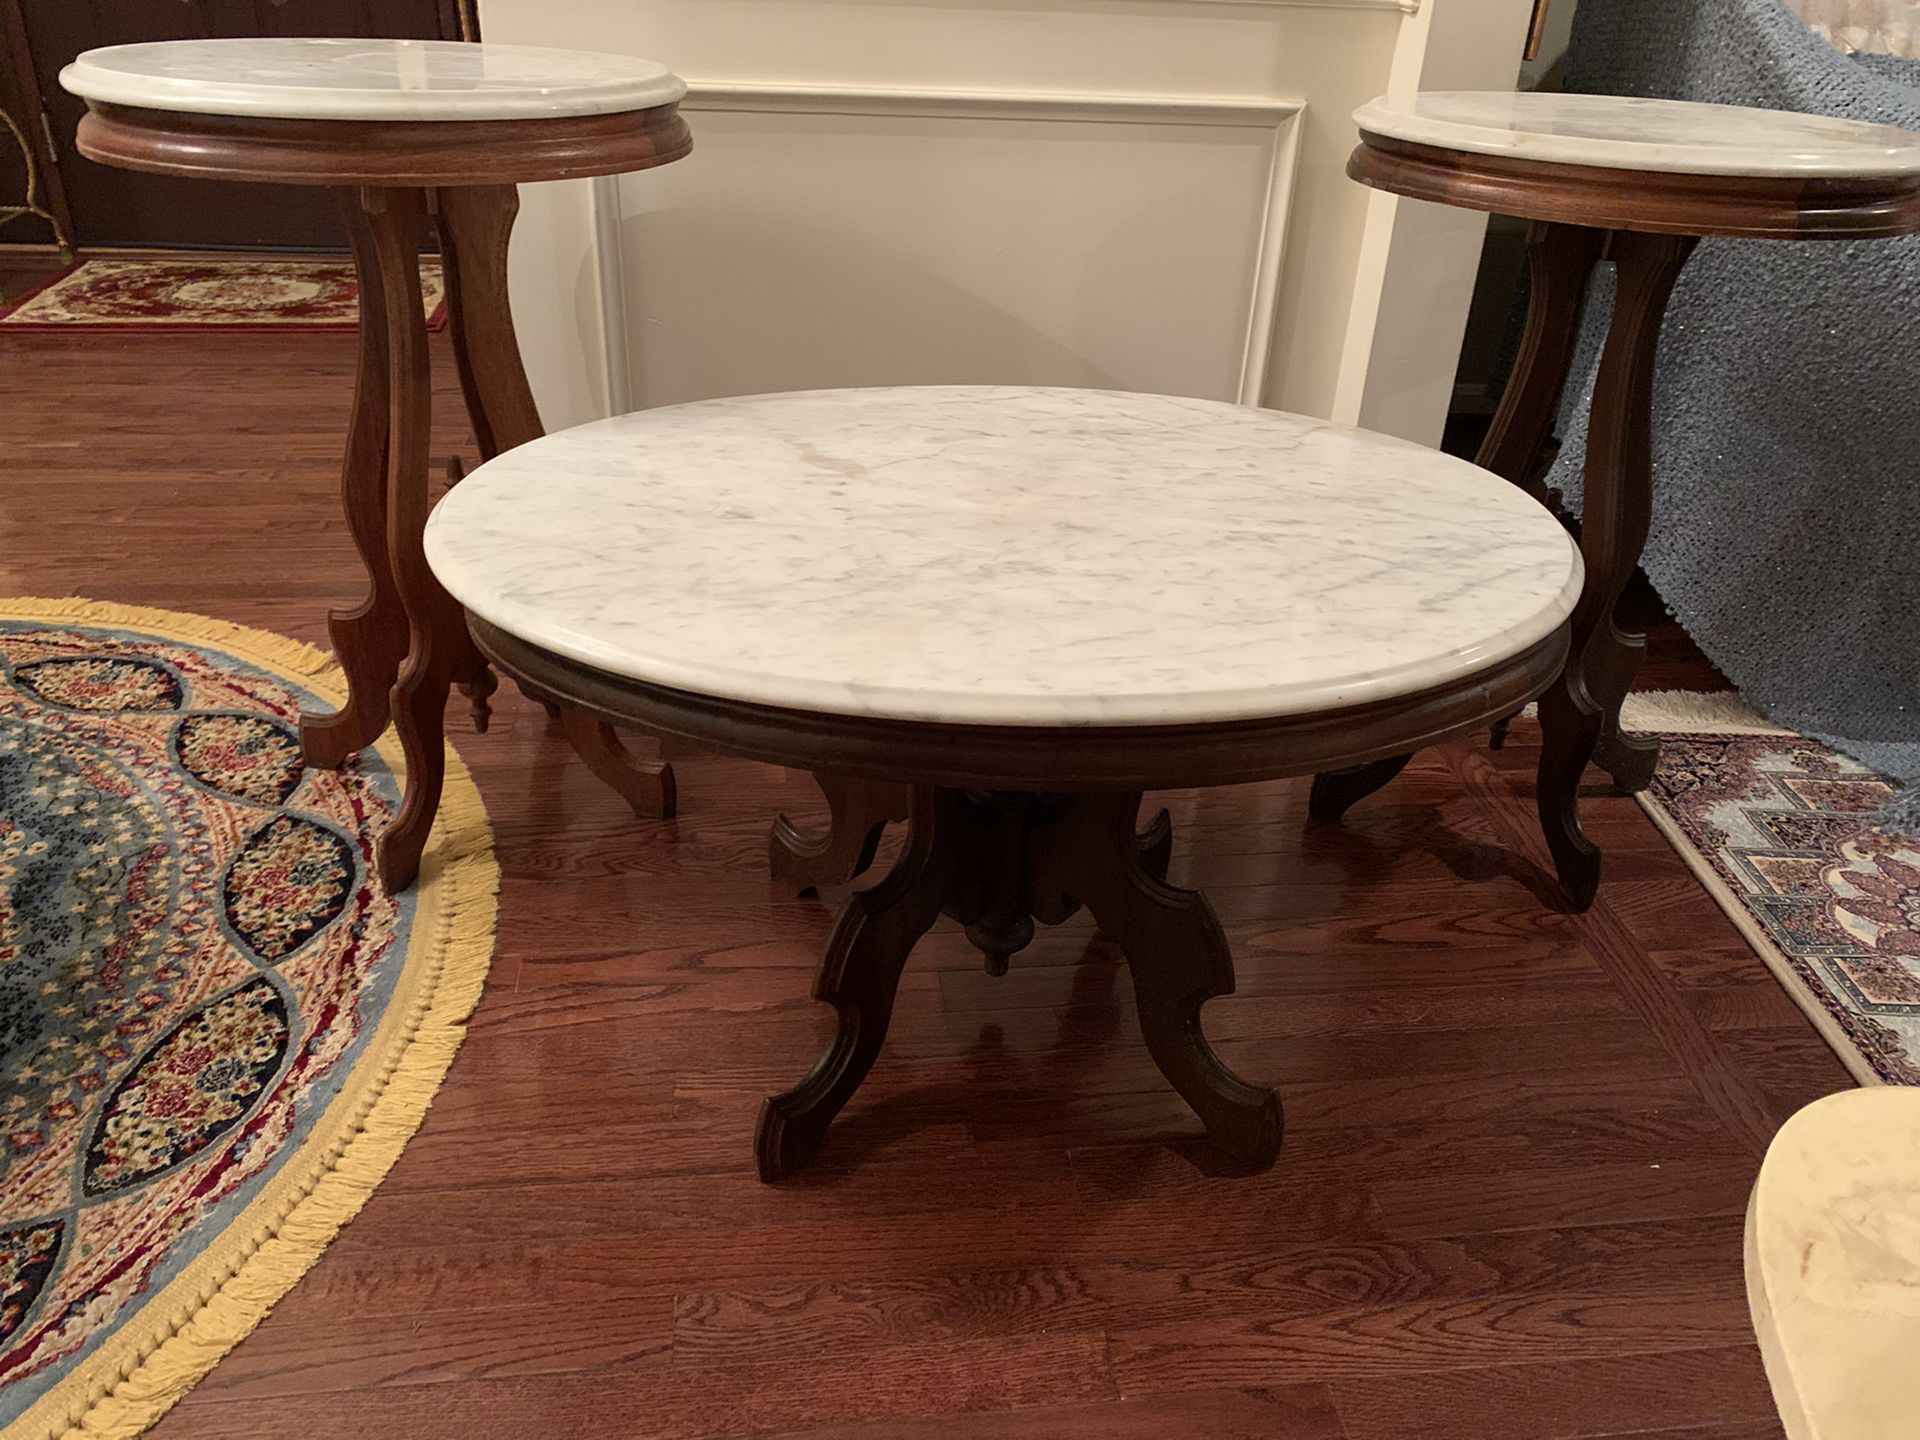 Three gorges Italian marble top table all for 280